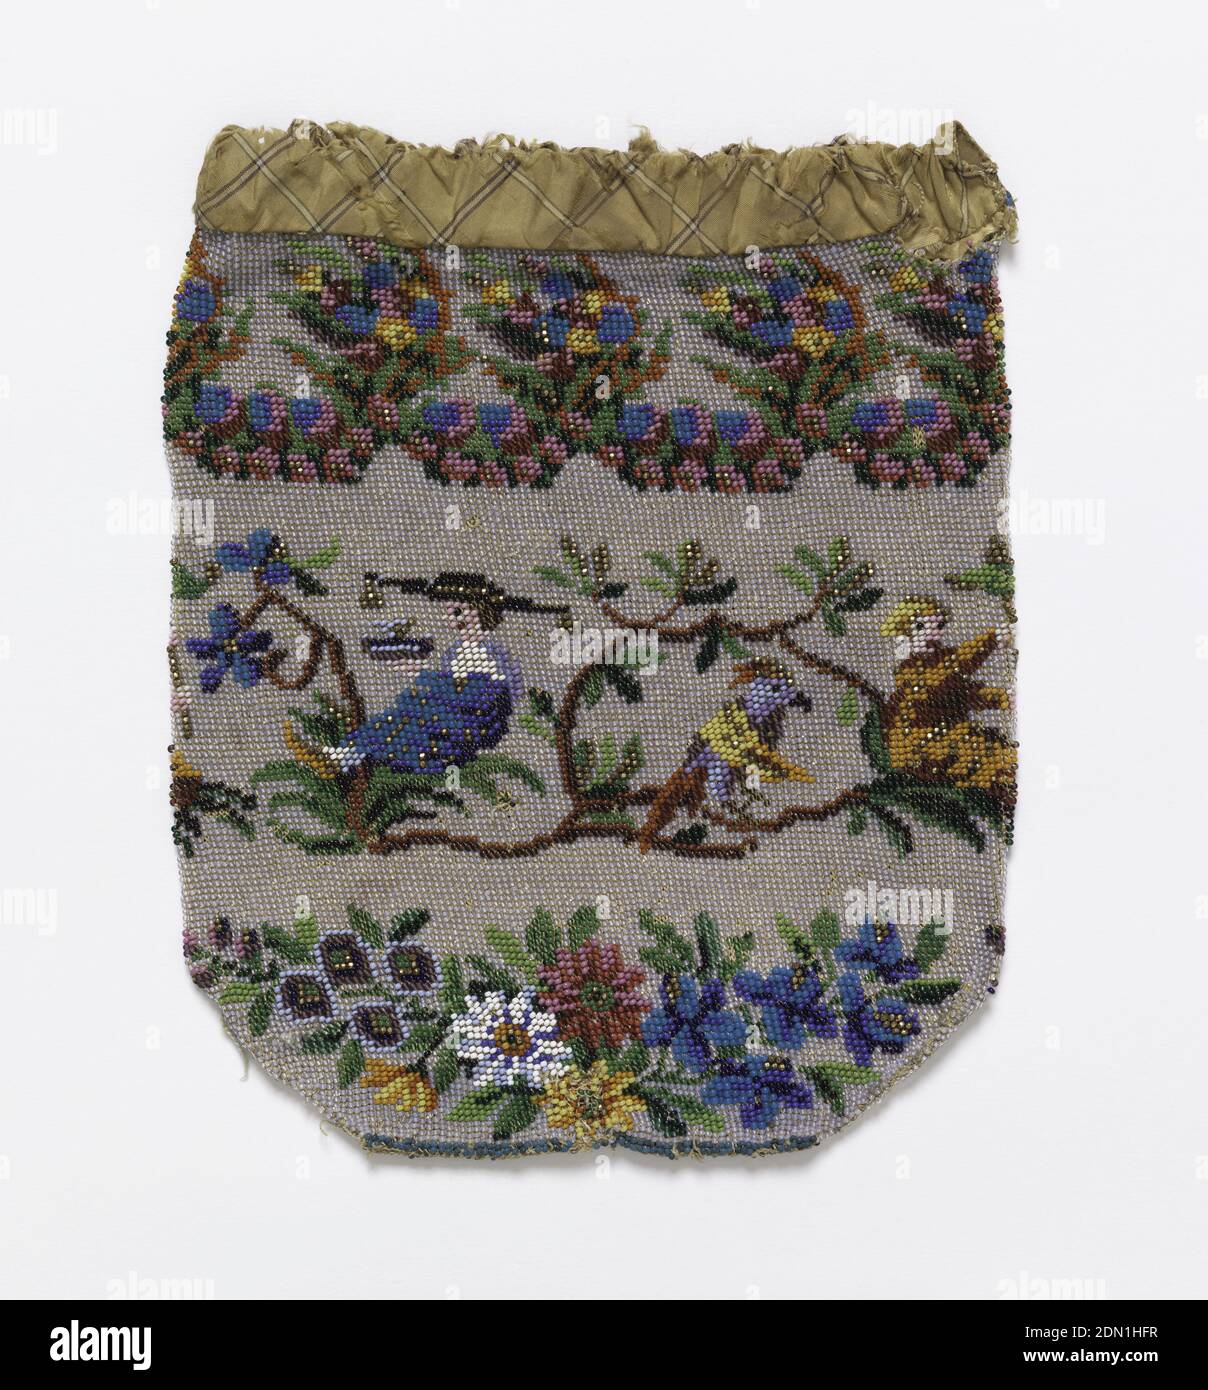 Purse (tobacco pouch), Medium: silk, glass and metal beads Technique: knitted in crossed stockinette stitch, Silk strung with glass and metal beads. Worked as a tube beginning at bottom., Germany, 1815–40, costume & accessories, Purse (tobacco pouch Stock Photo